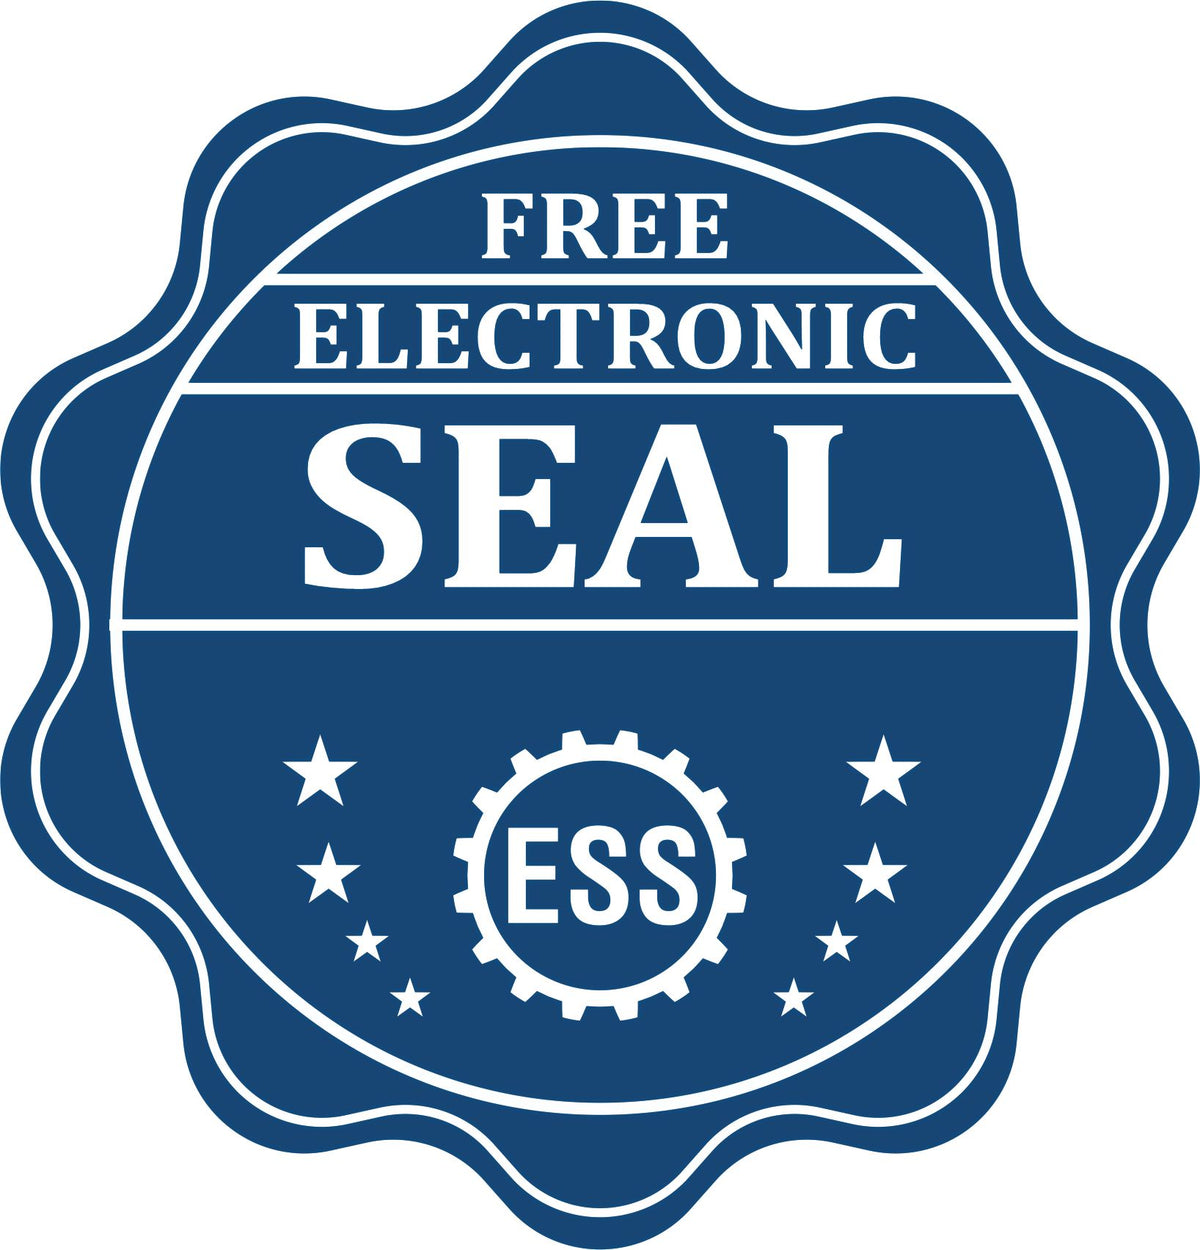 A badge showing a free electronic seal for the Handheld Nevada Land Surveyor Seal with stars and the ESS gear on the emblem.